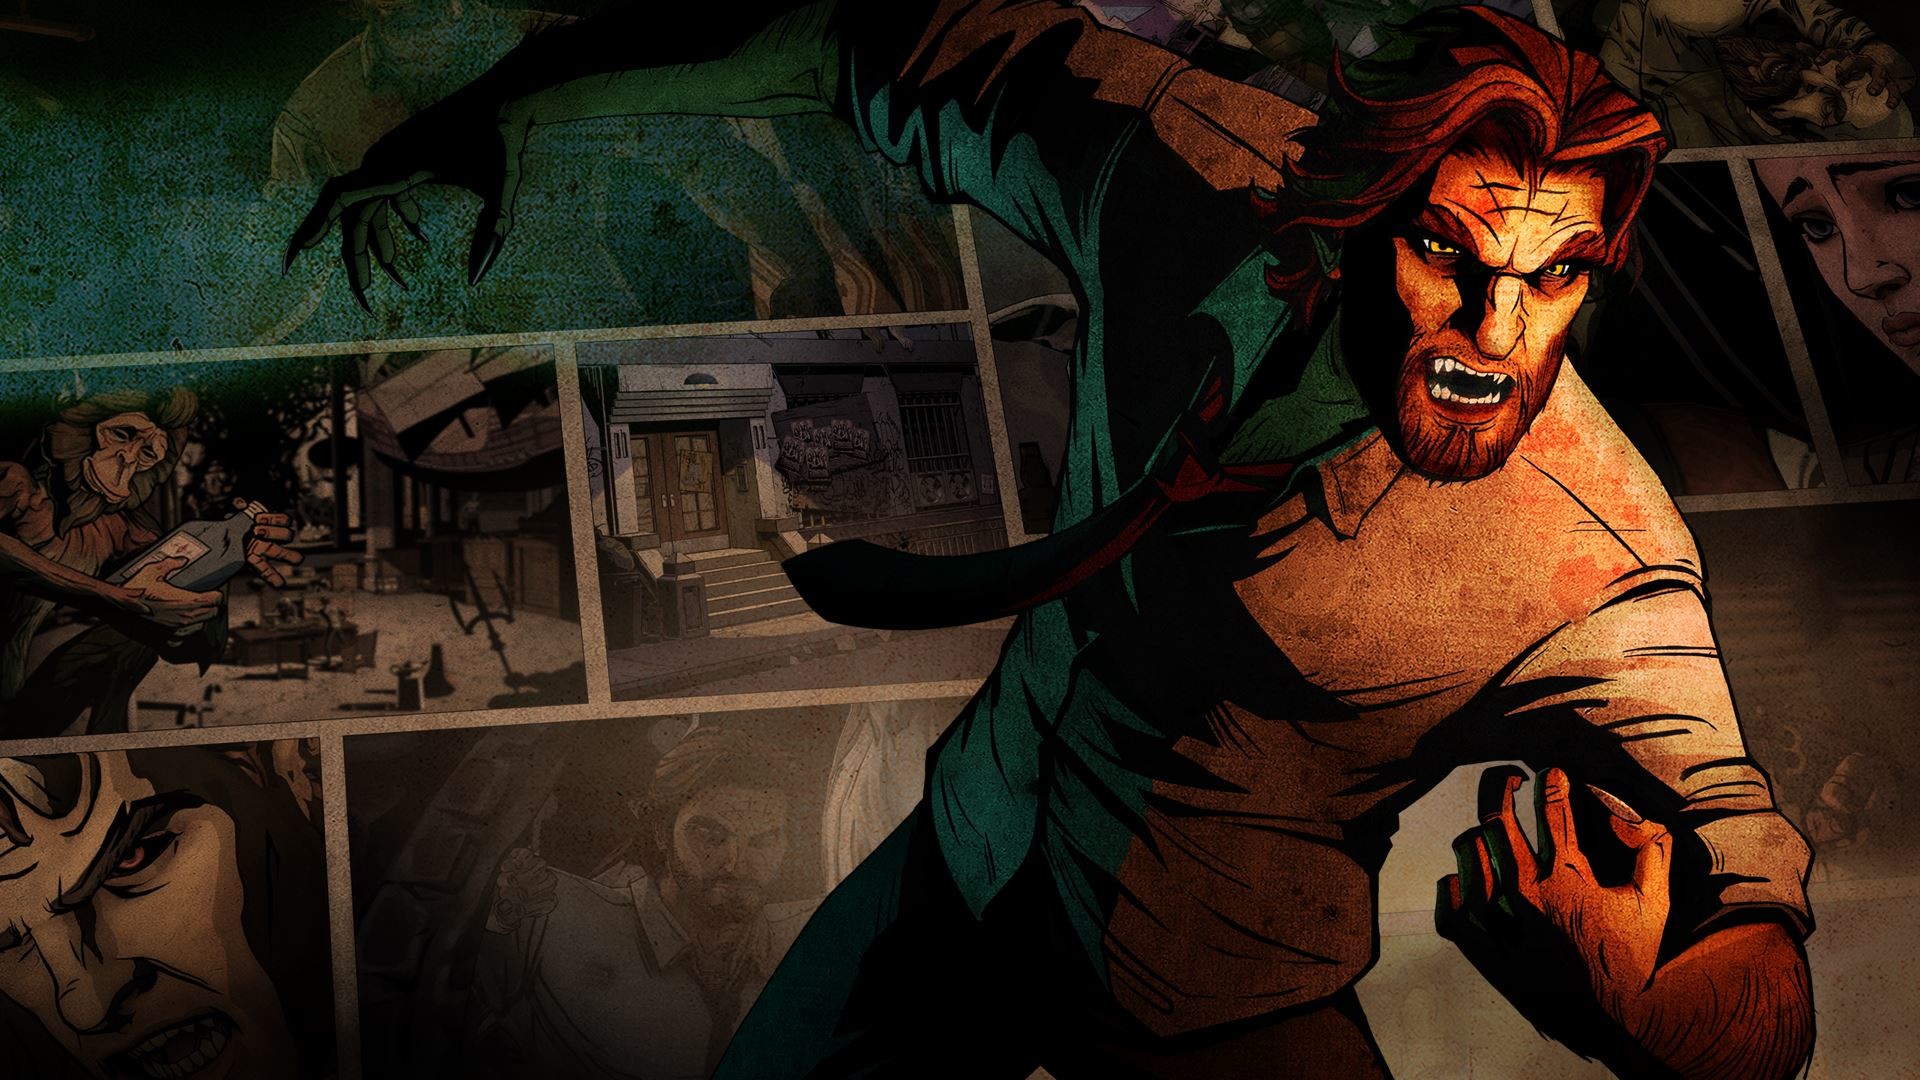 1920x1080 The Wolf Among Us images The Wolf Among Us wallpaper HD wallpaper and  background photos